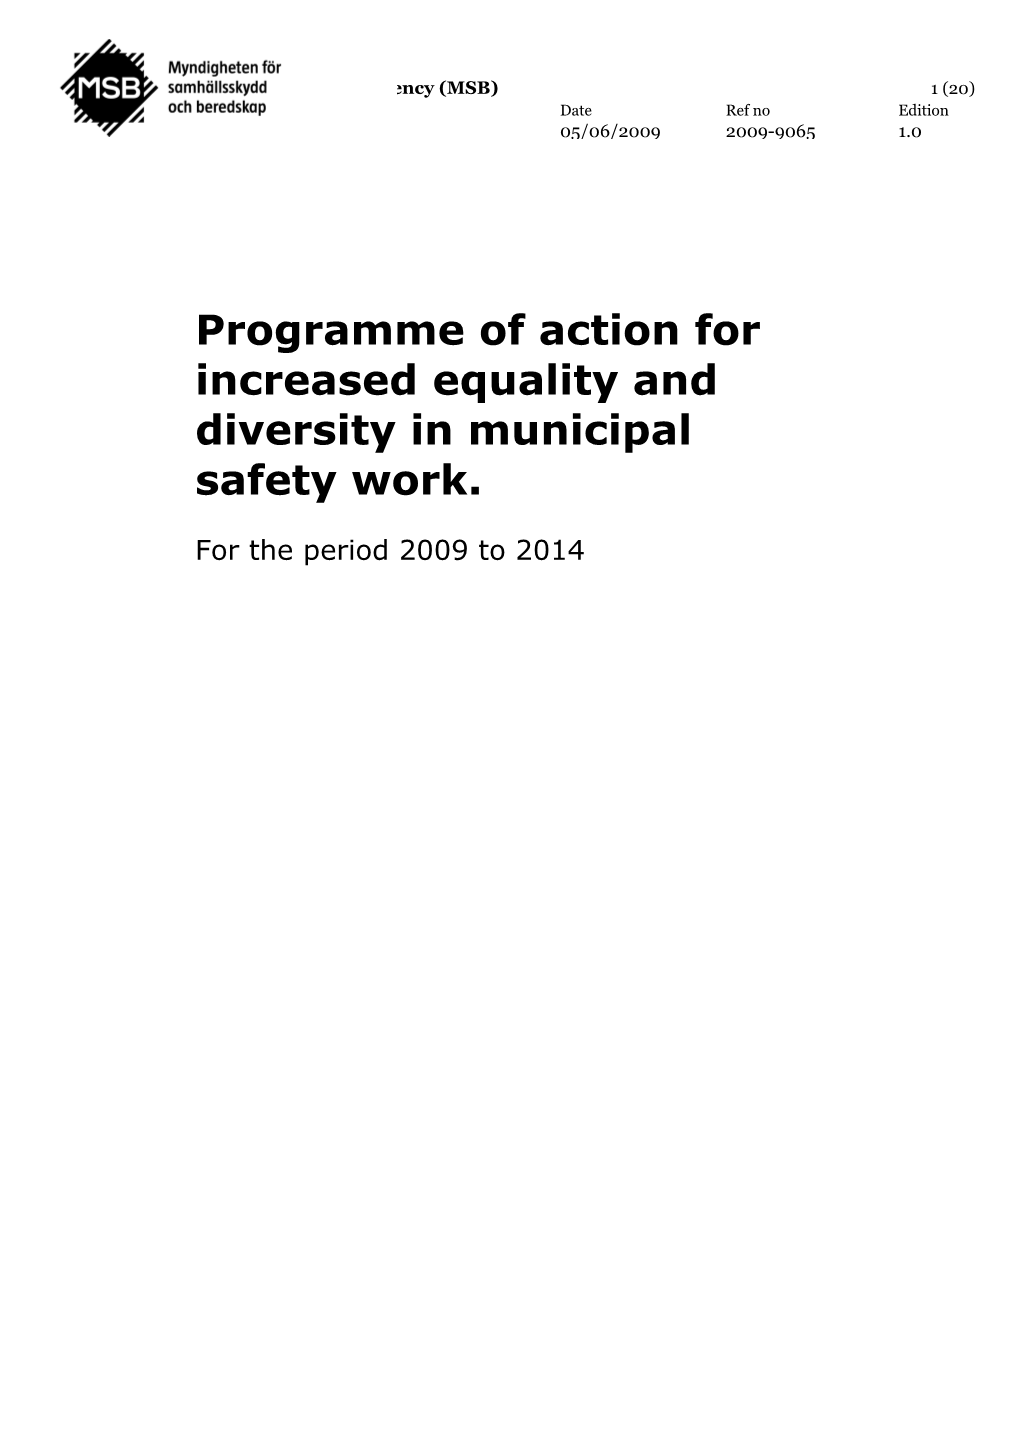 Programme of Action for Increased Equality and Diversity in Municipal Safety Work